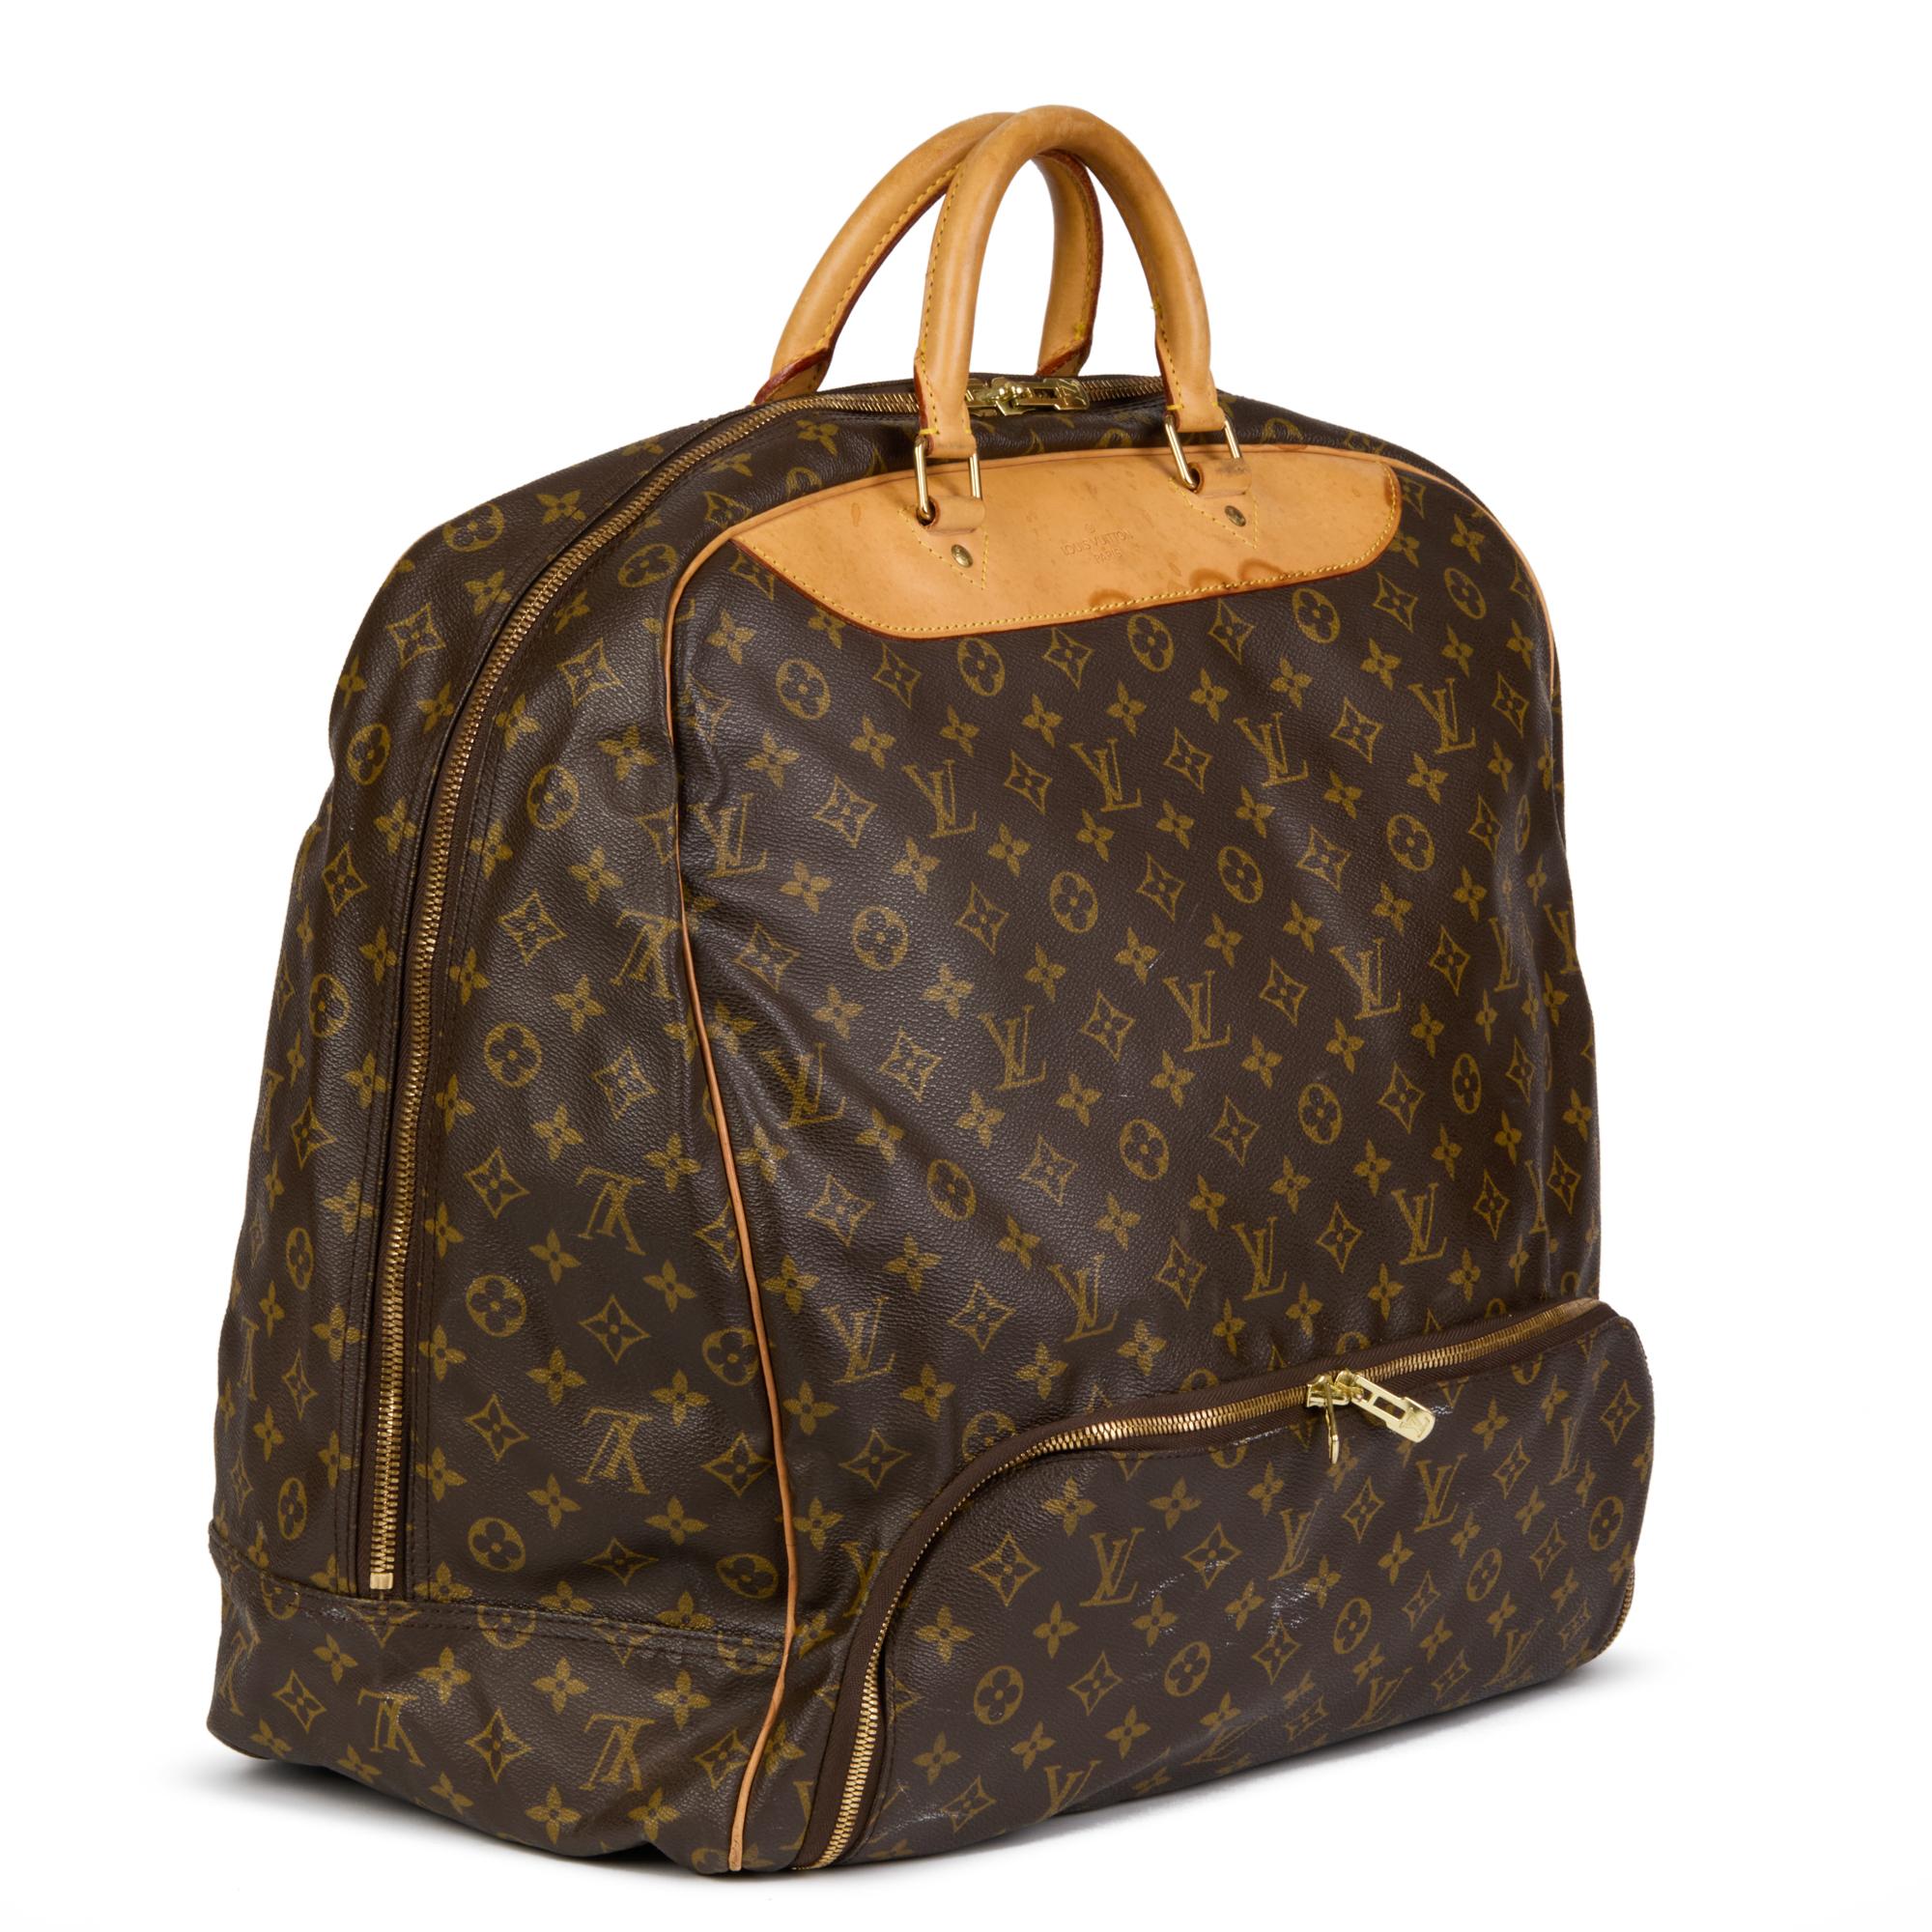 LOUIS VUITTON
Brown Monogram Coated Canvas Vintage Evasion

Xupes Reference: CB630
Serial Number: VI1926
Age (Circa): 1996
Authenticity Details: Date Stamp (Made in France)
Gender: Unisex
Type: Travel

Colour: Brown
Hardware: Golden